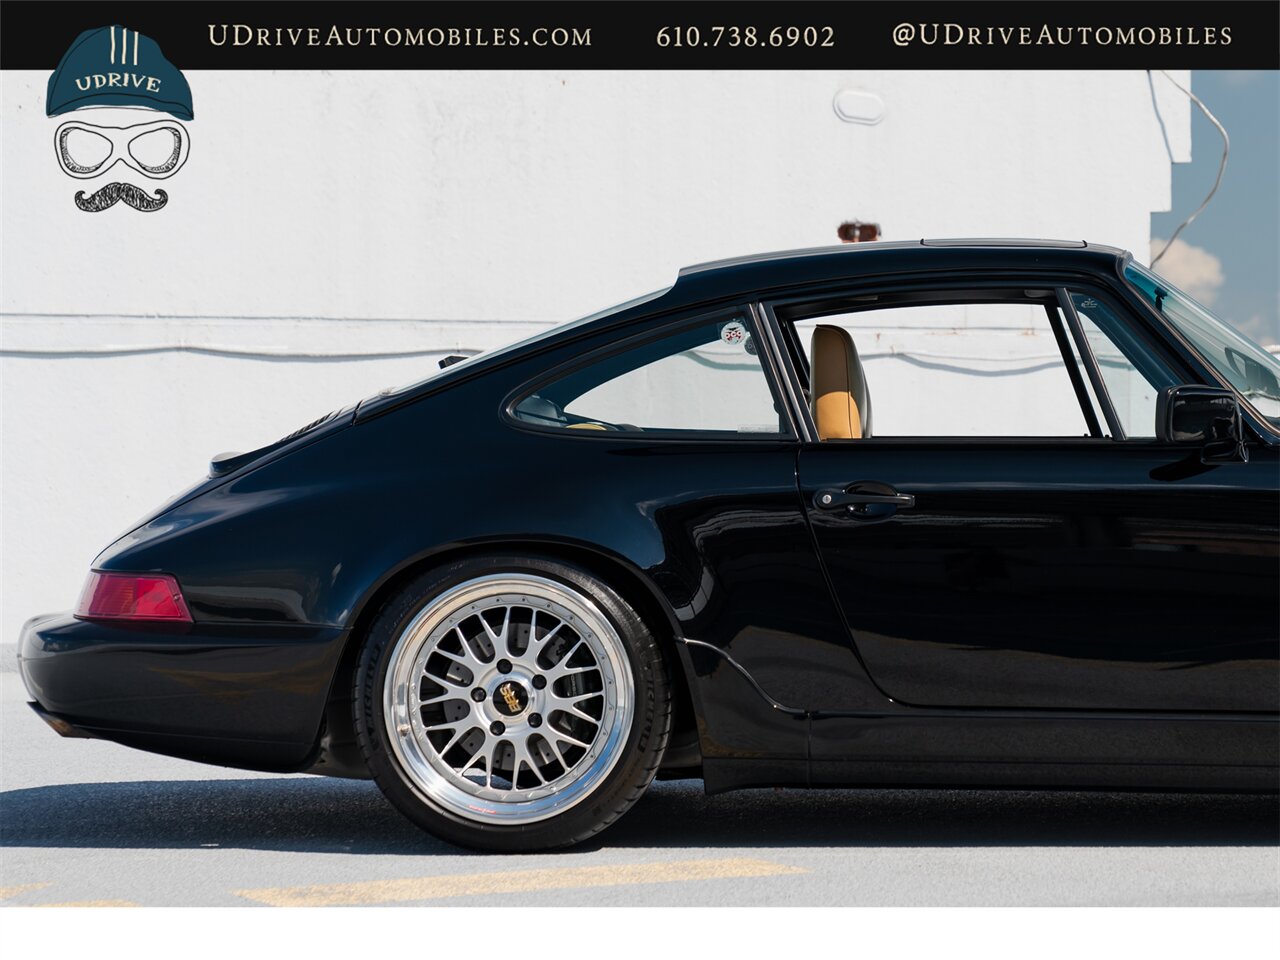 1989 Porsche 911 Carrera 4  964 C4 5 Speed Manual $63k Recent Service and Upgrades - Photo 21 - West Chester, PA 19382